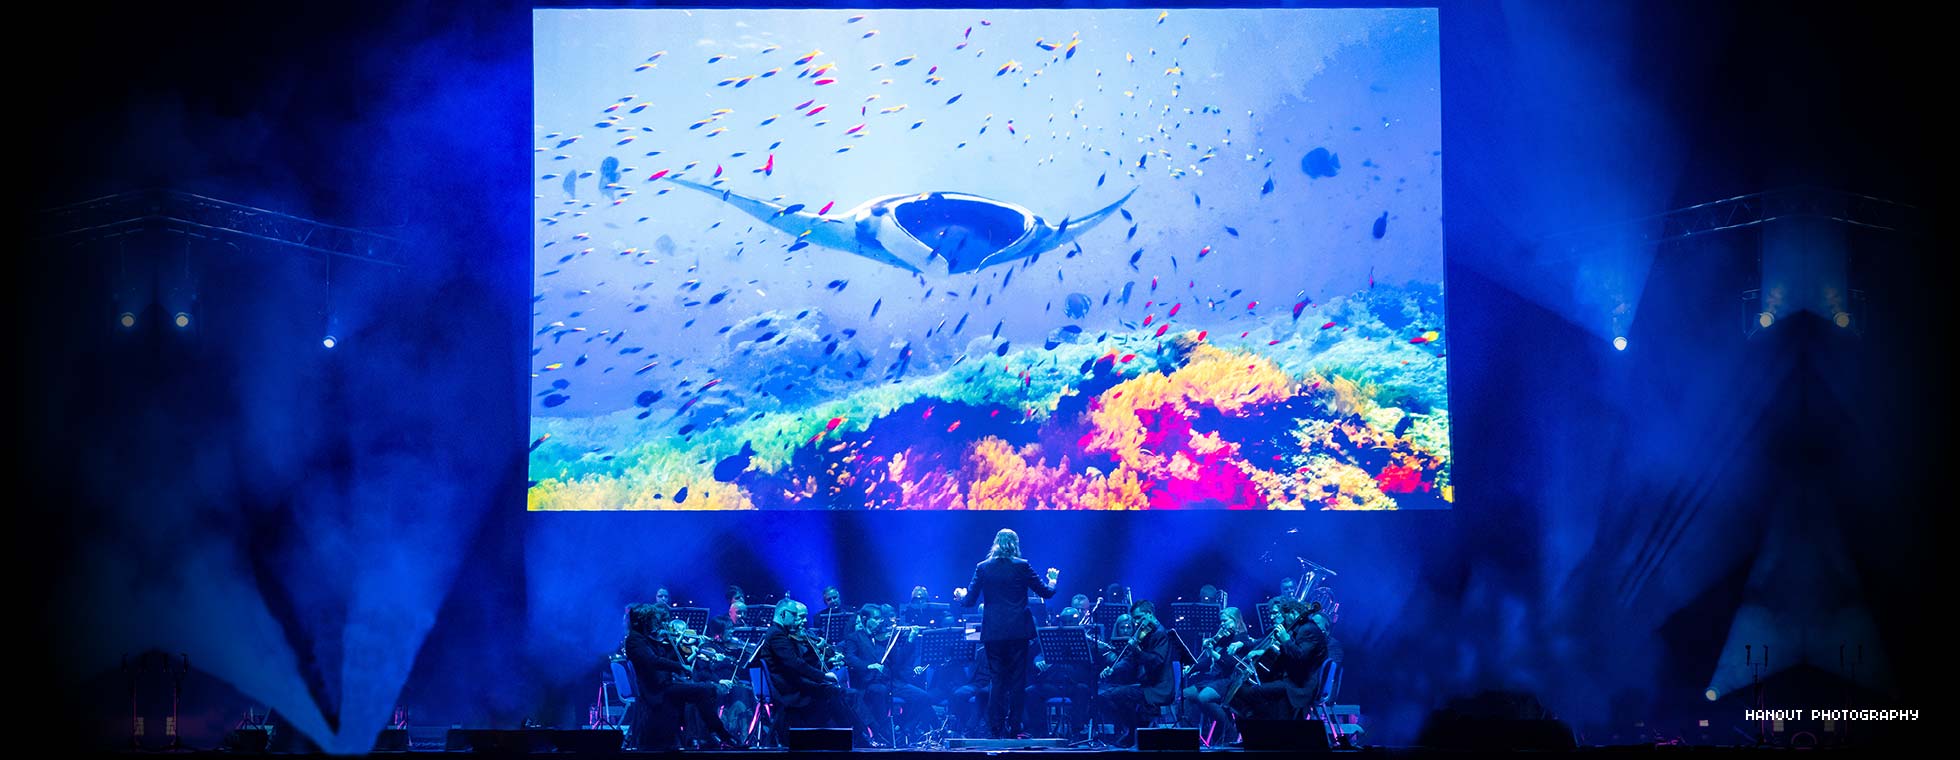 Orchestra concert on stage with ocean footage on a screen behind them